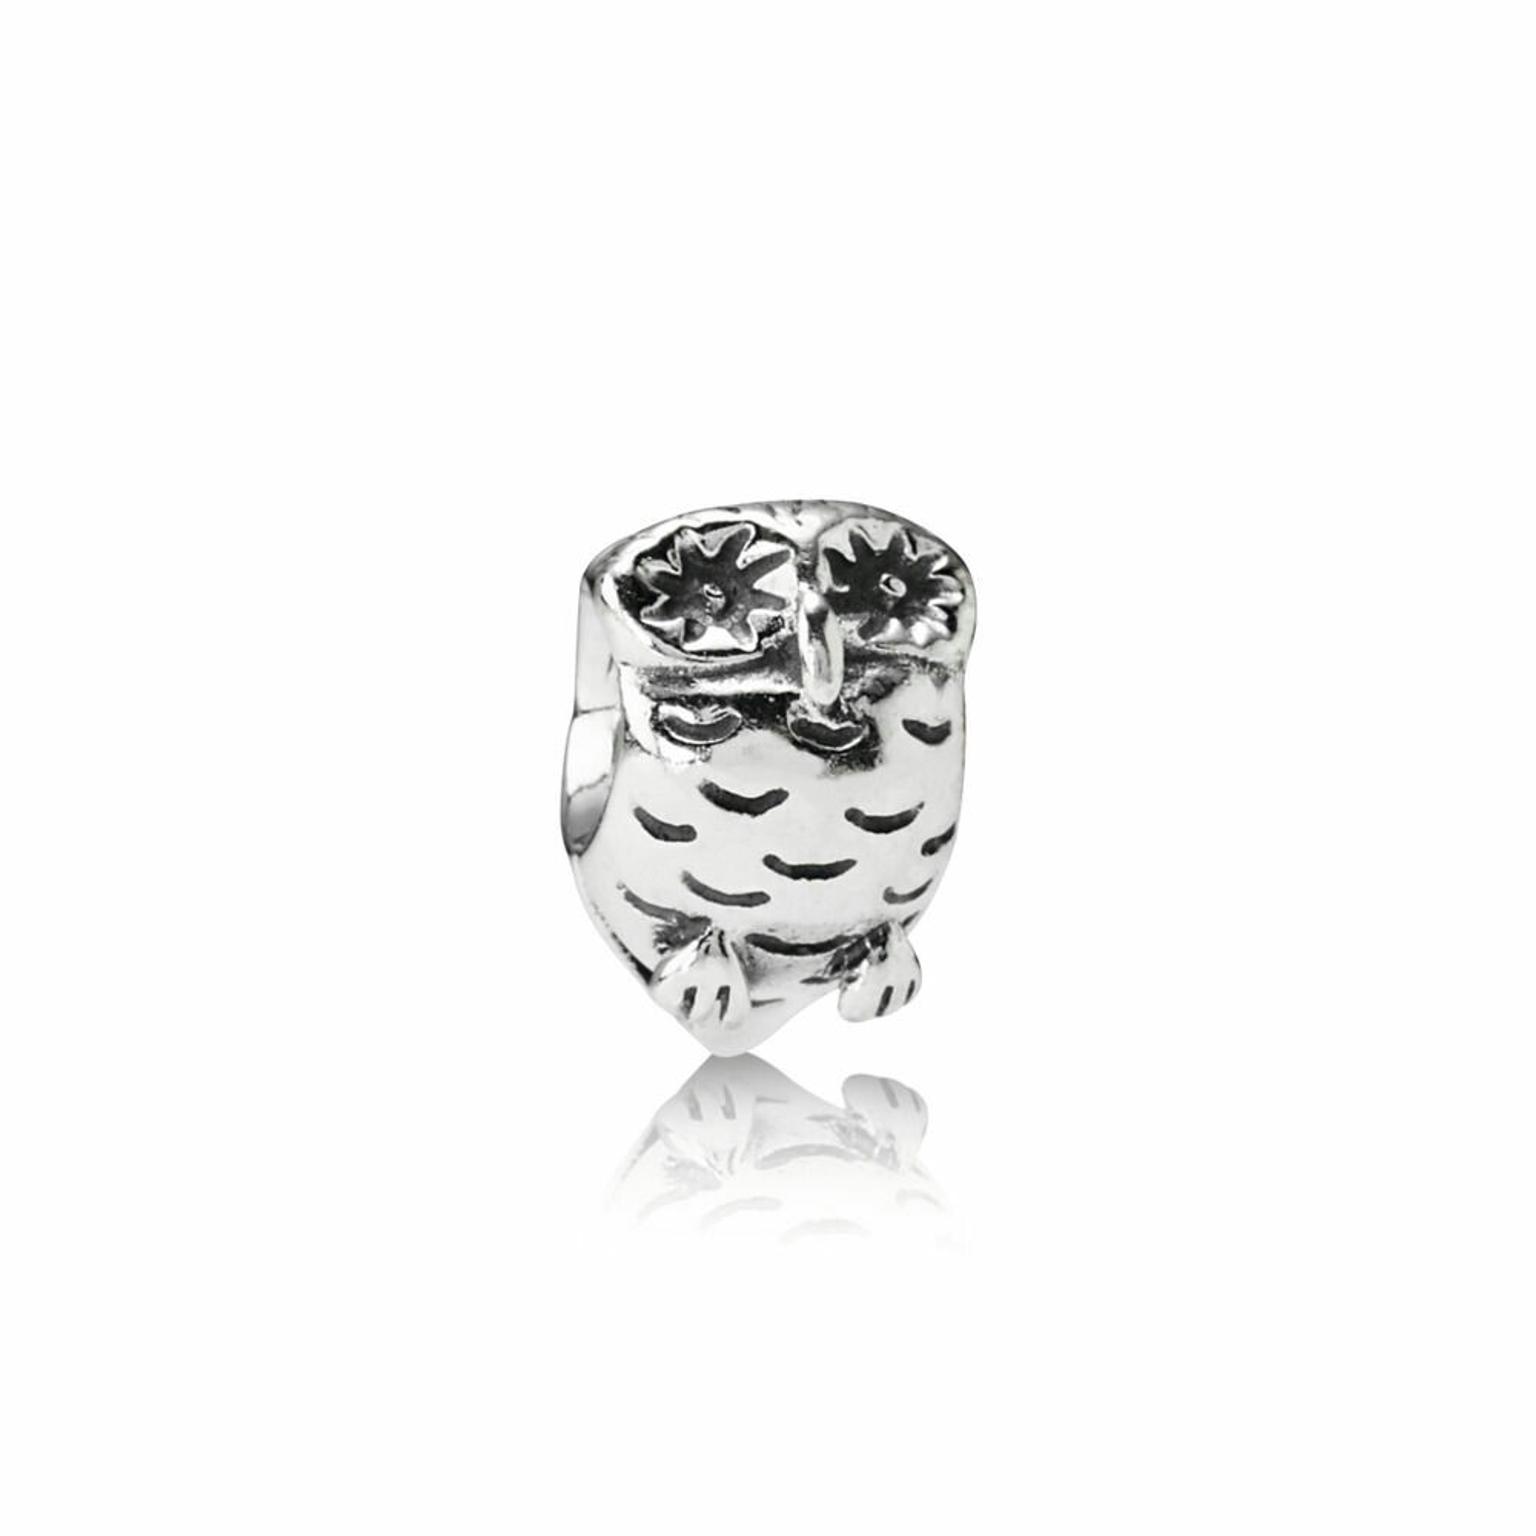 Charm Pandora Gufo in 70124 Bari for €20.00 for sale | Shpock